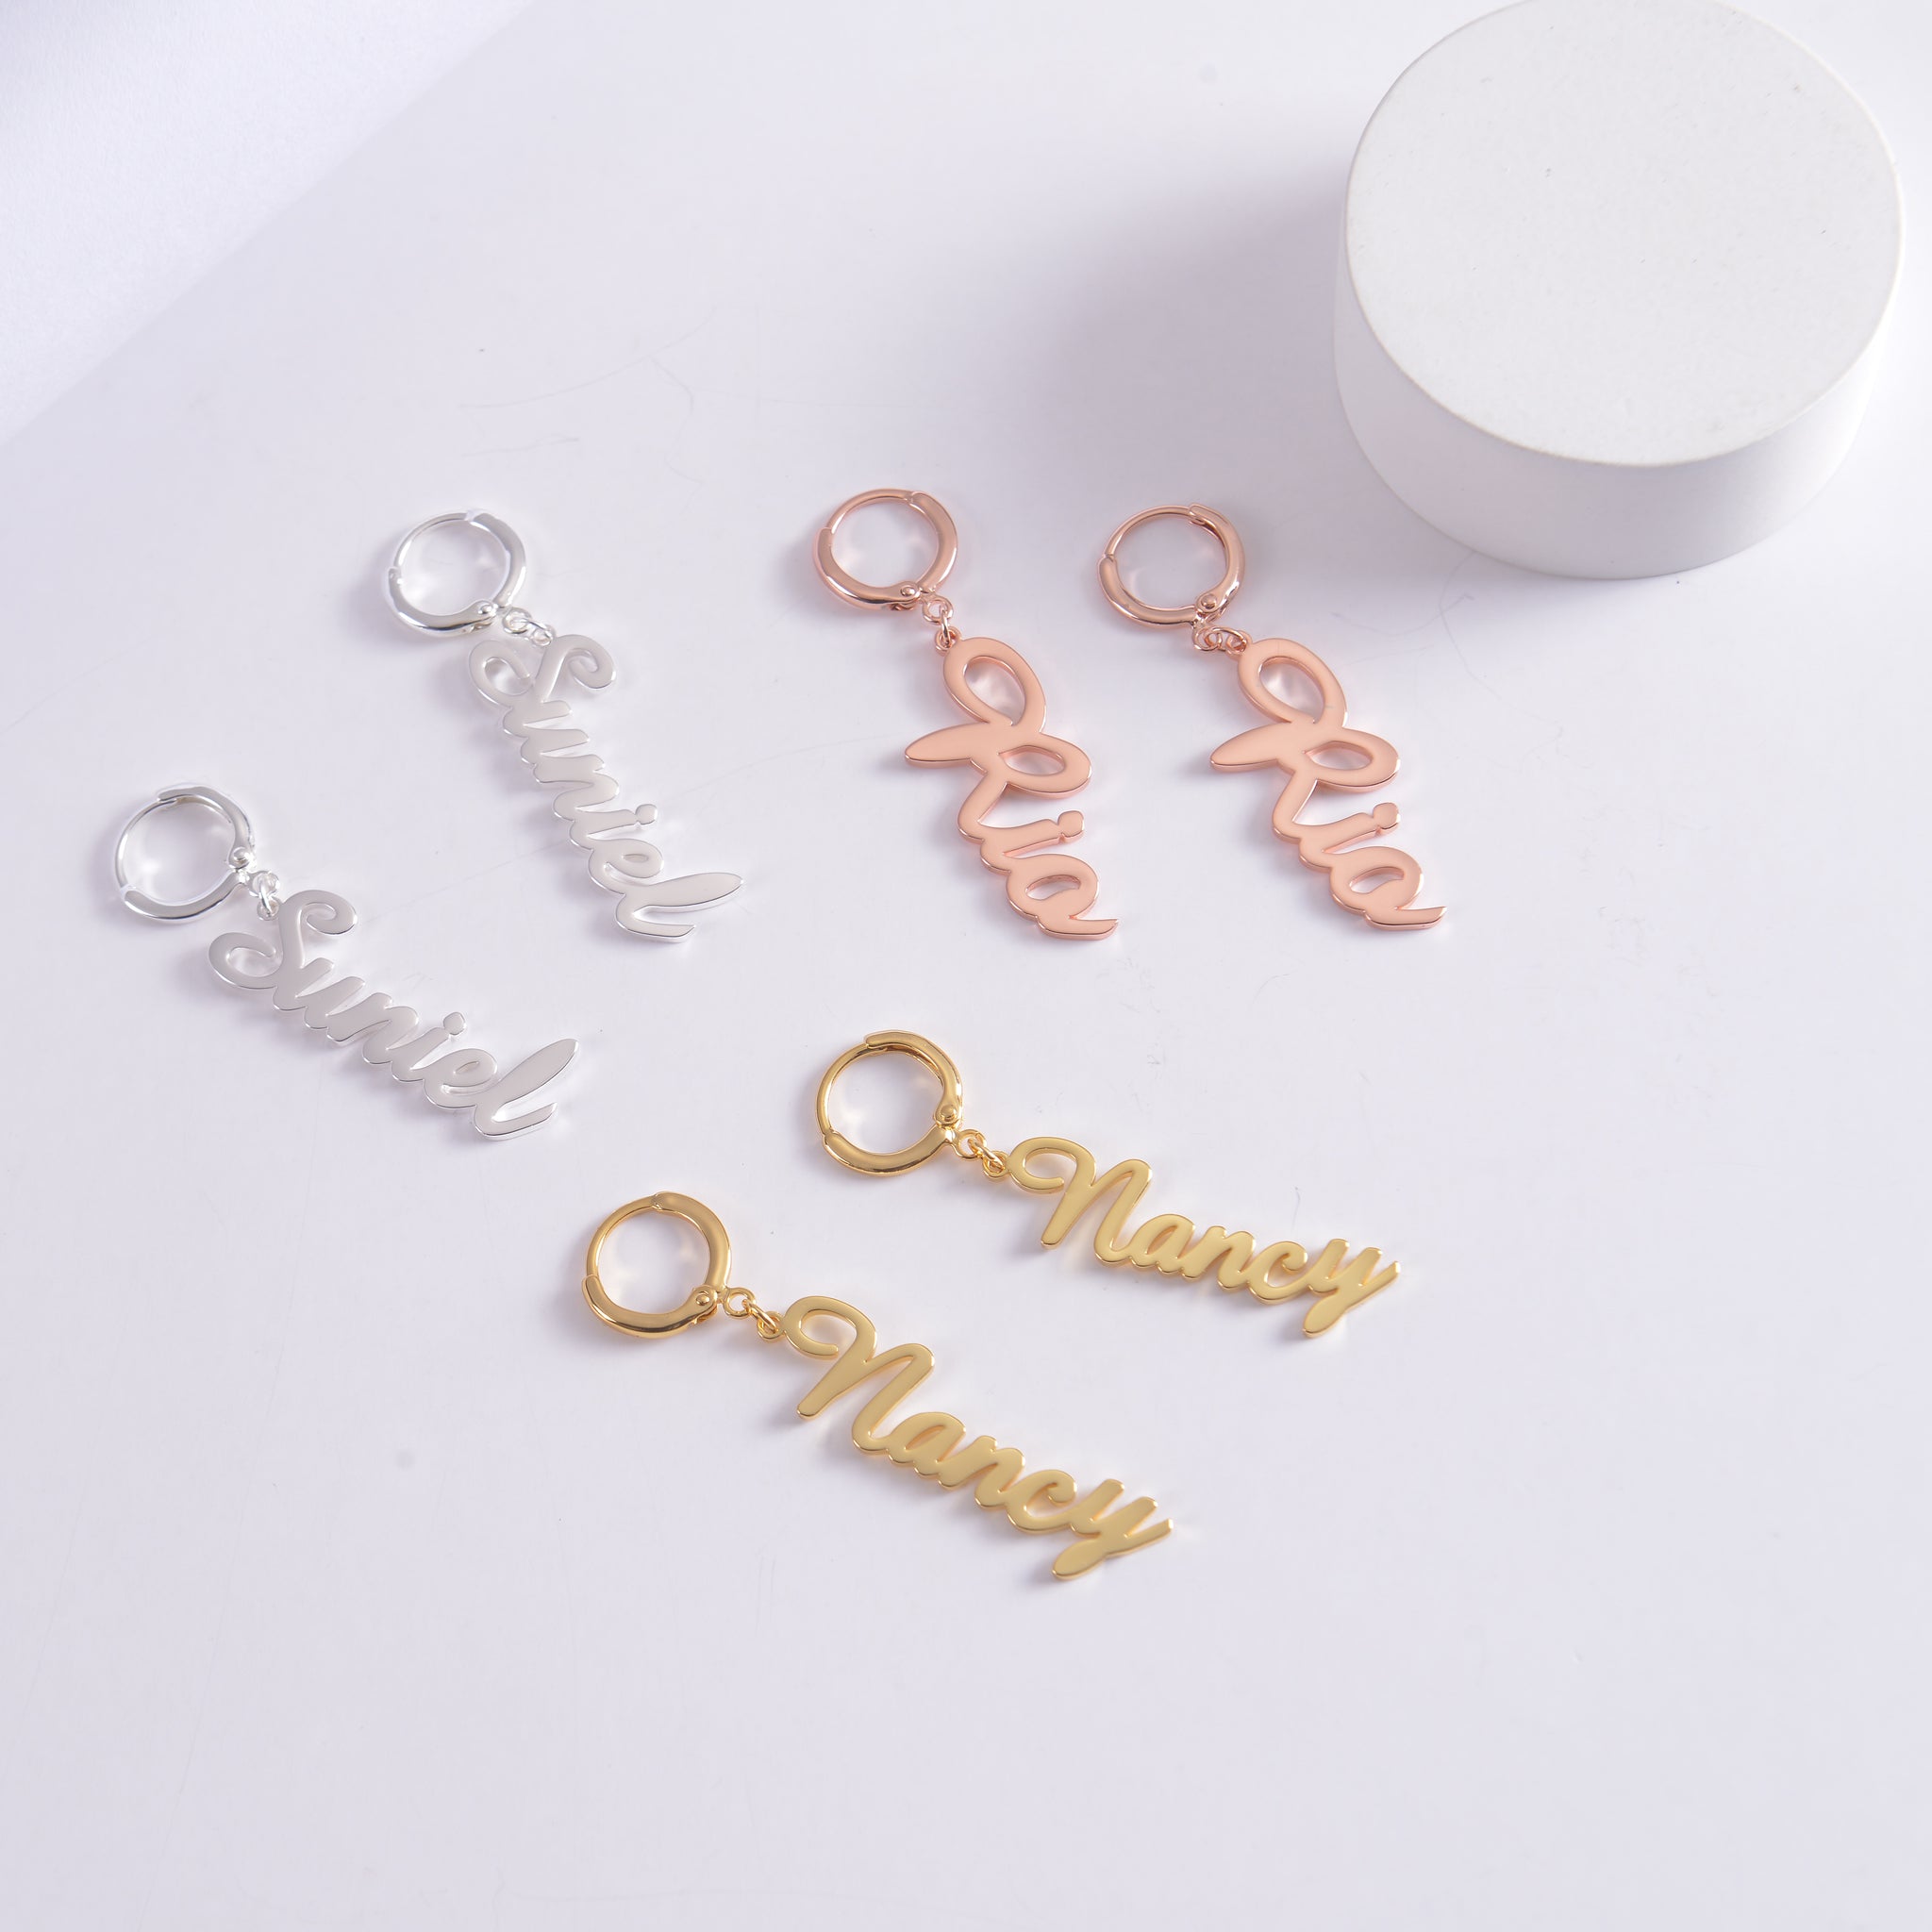 Personalized Signature Name Earrings